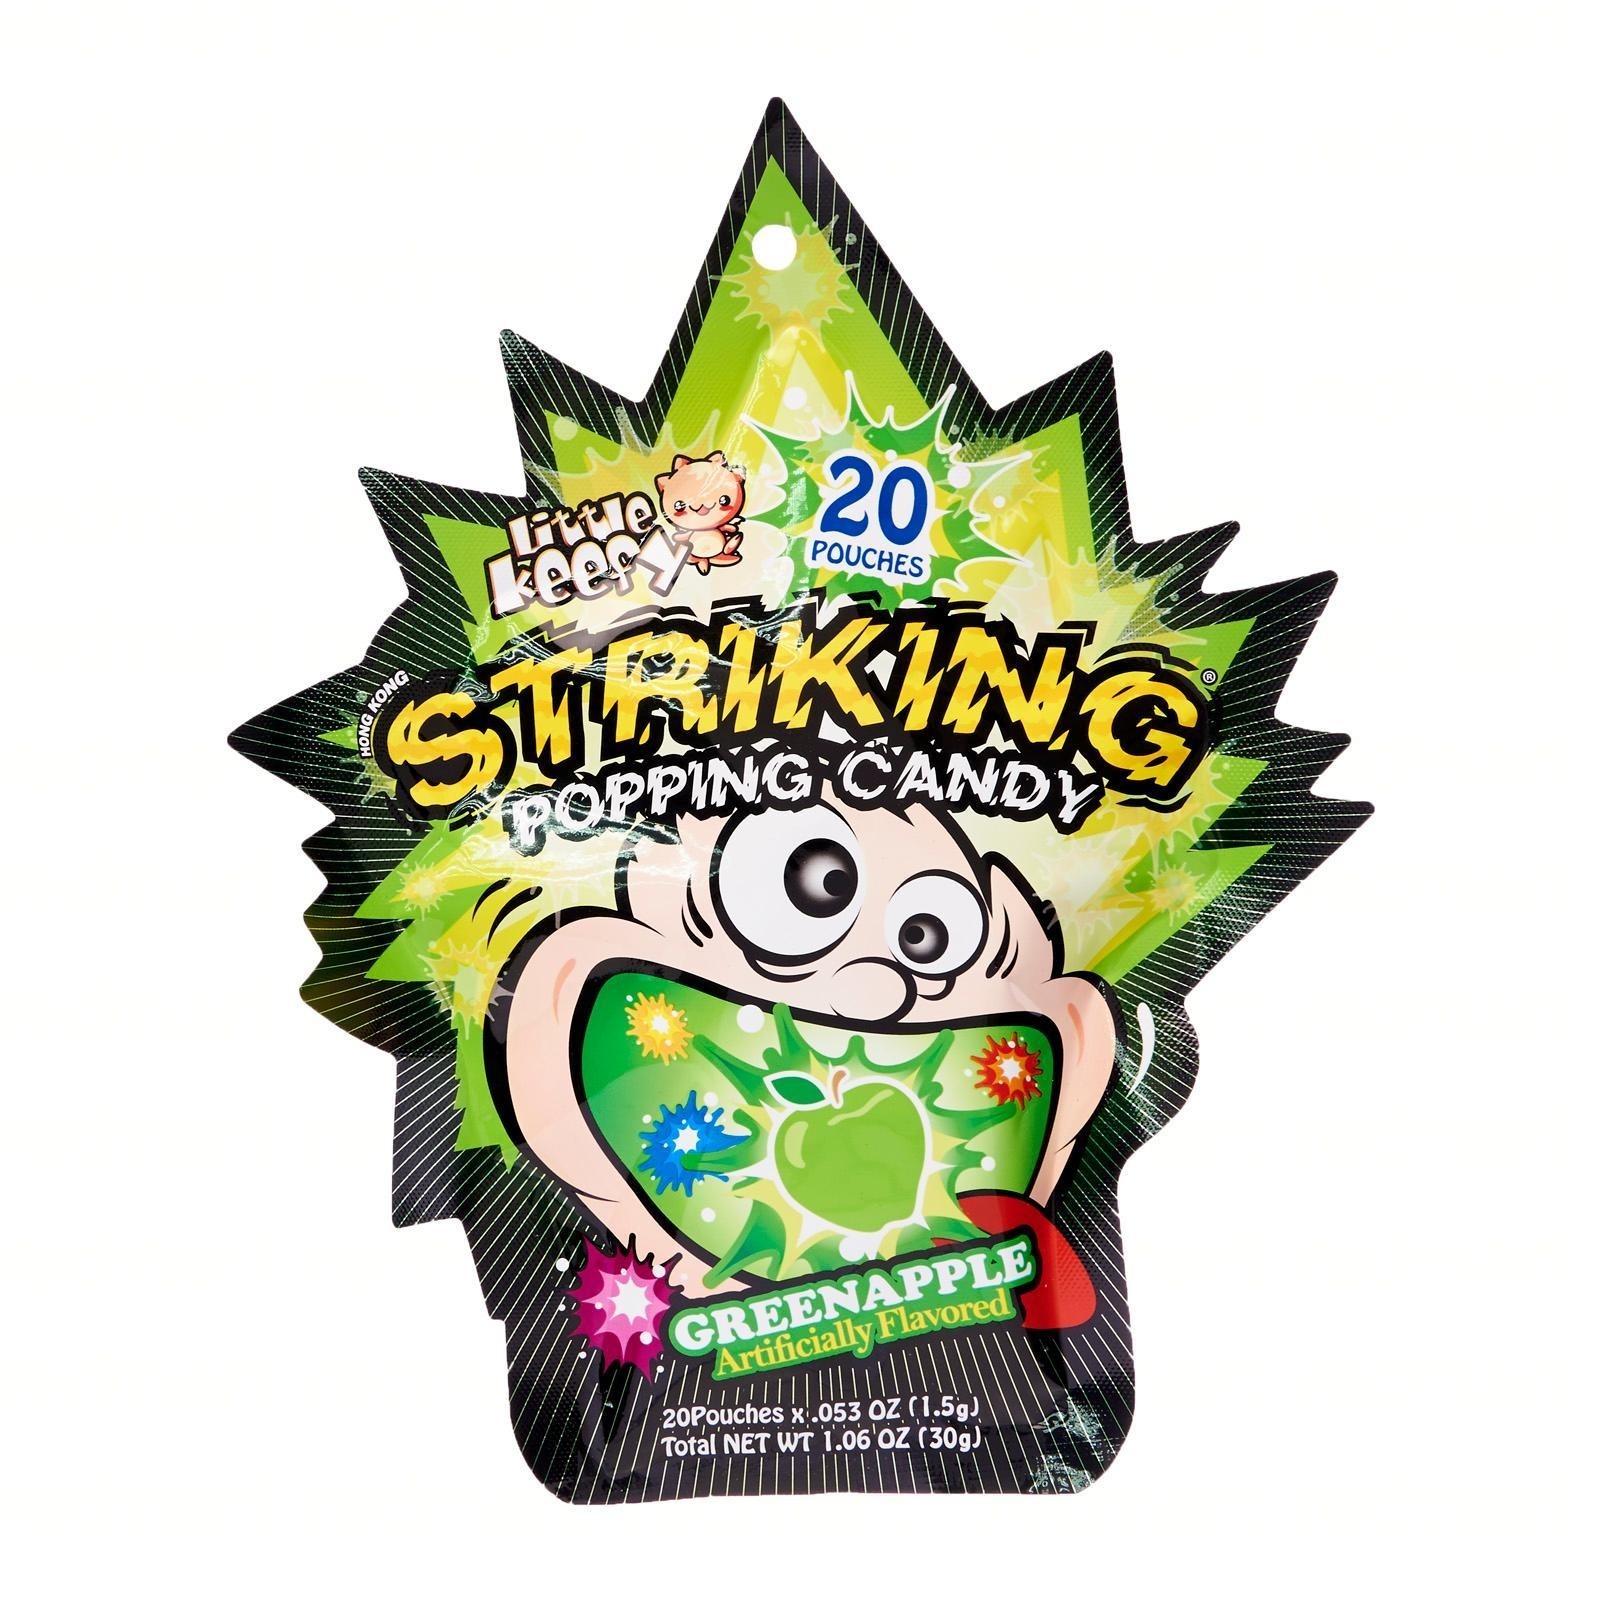 Striking Popping Candy Green Apple - 20 Poches 30g